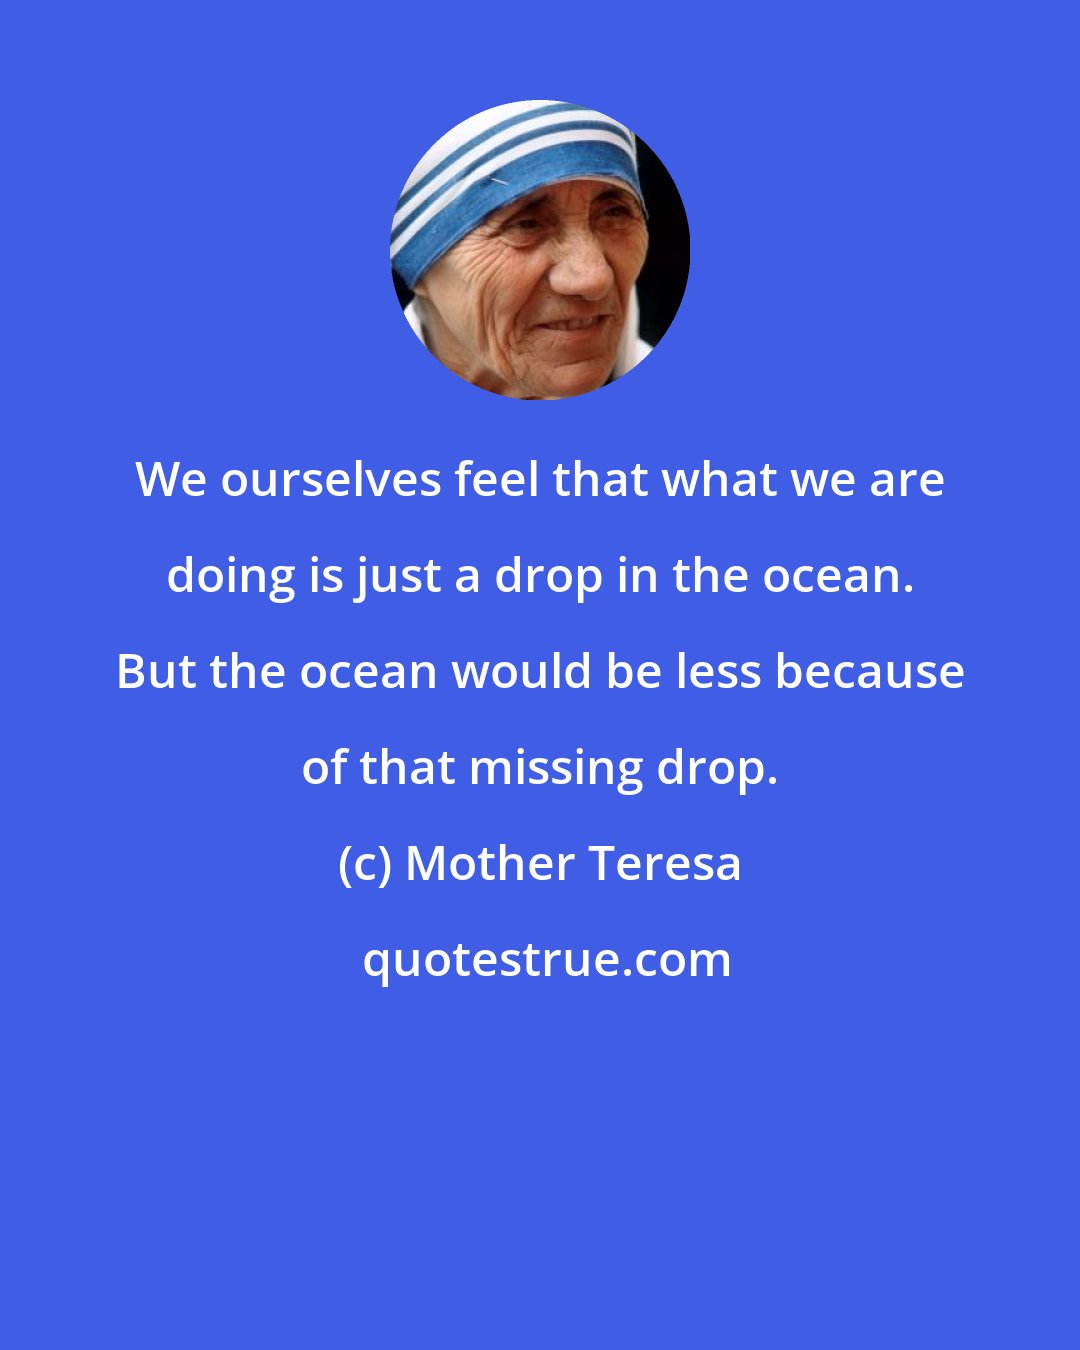 Mother Teresa: We ourselves feel that what we are doing is just a drop in the ocean. But the ocean would be less because of that missing drop.